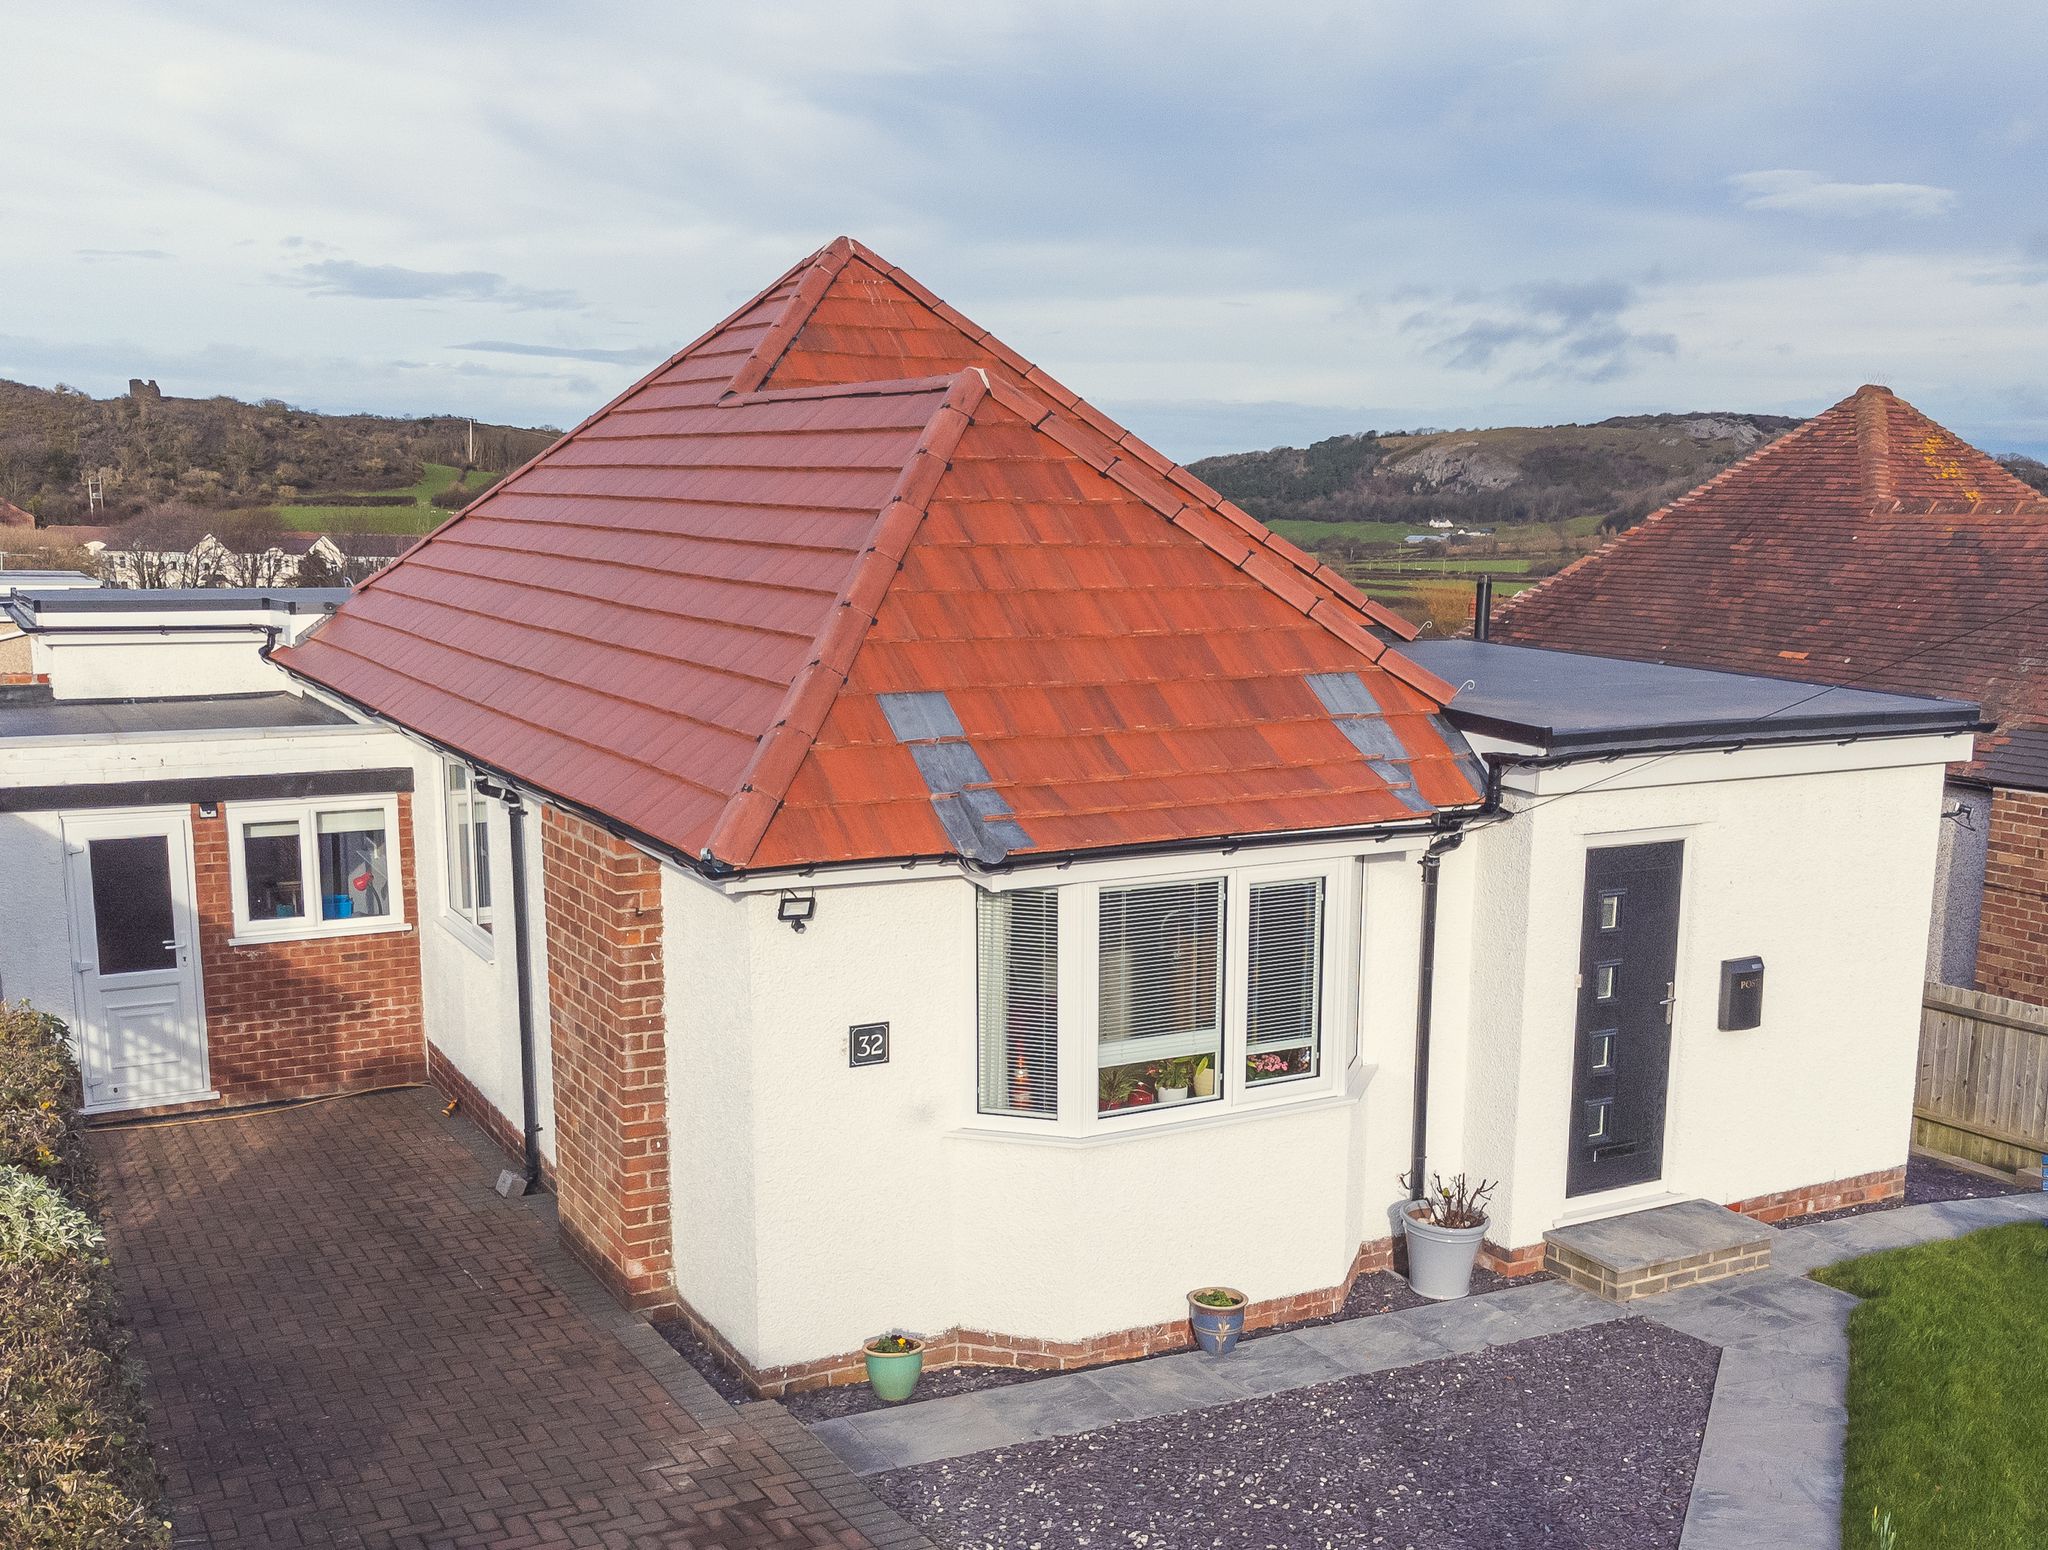 Tile Roof Contractors Cefn-y-bedd, LL12 - DD Roofing